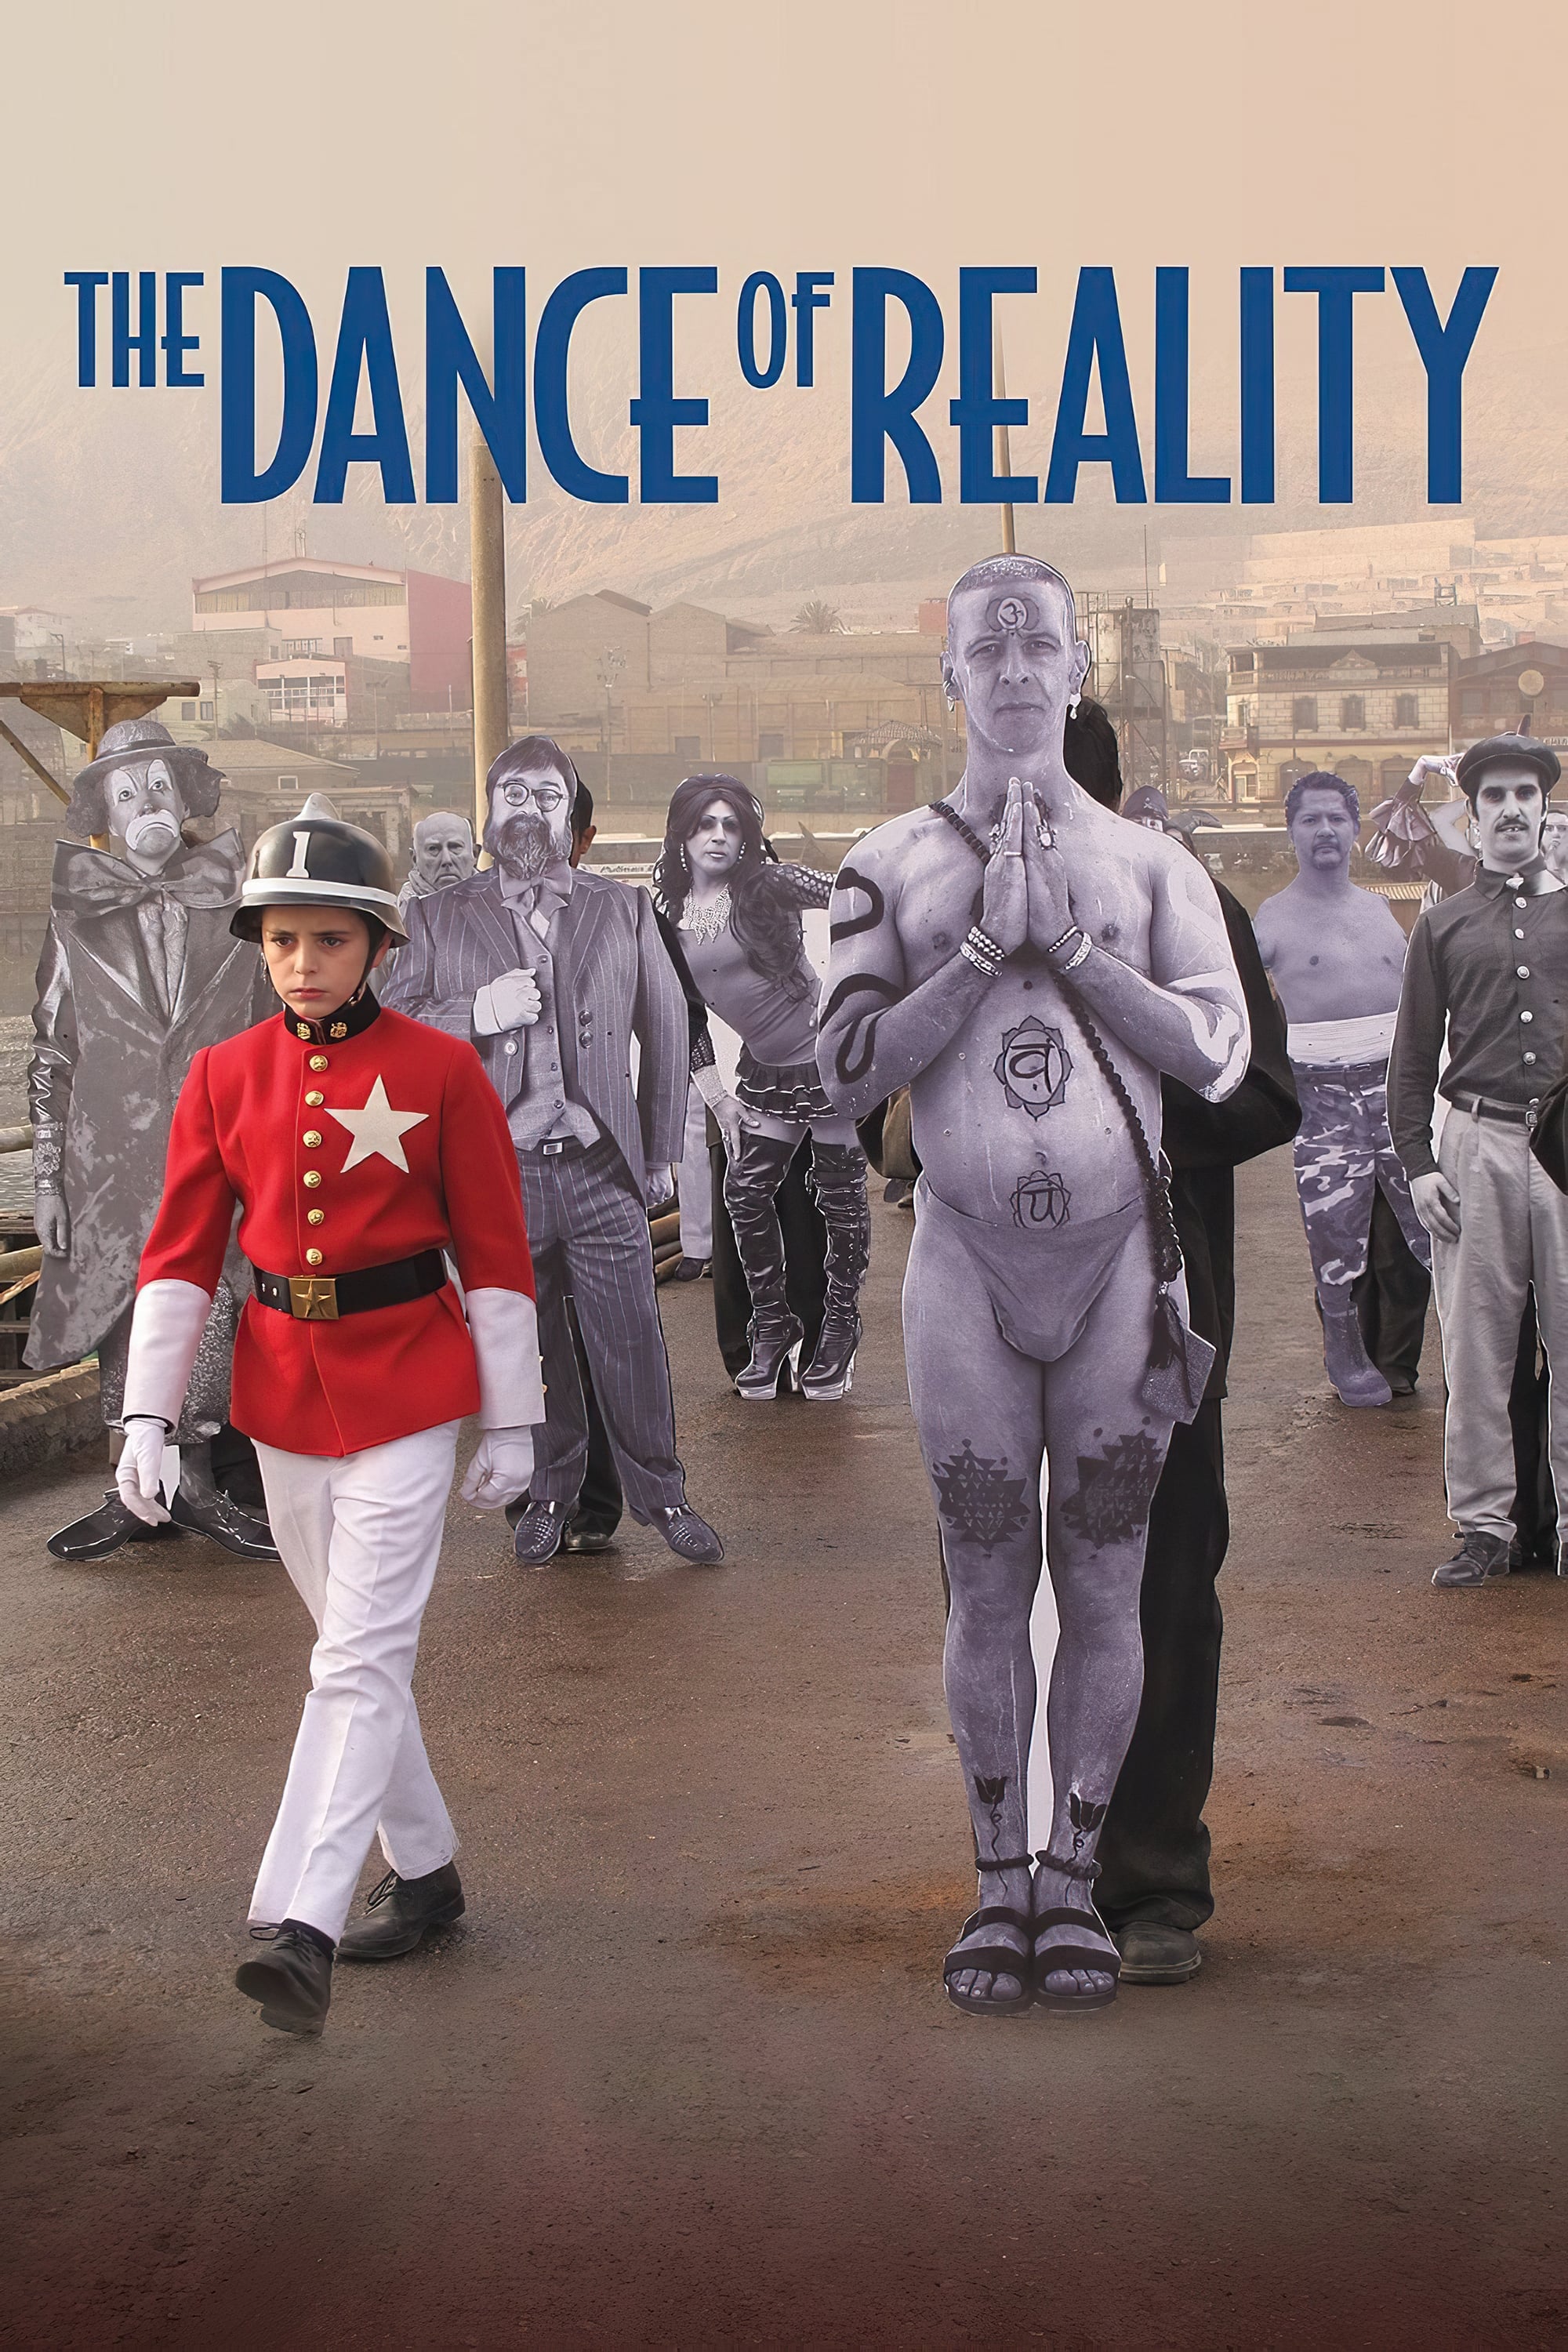 The Dance of Reality (2013)